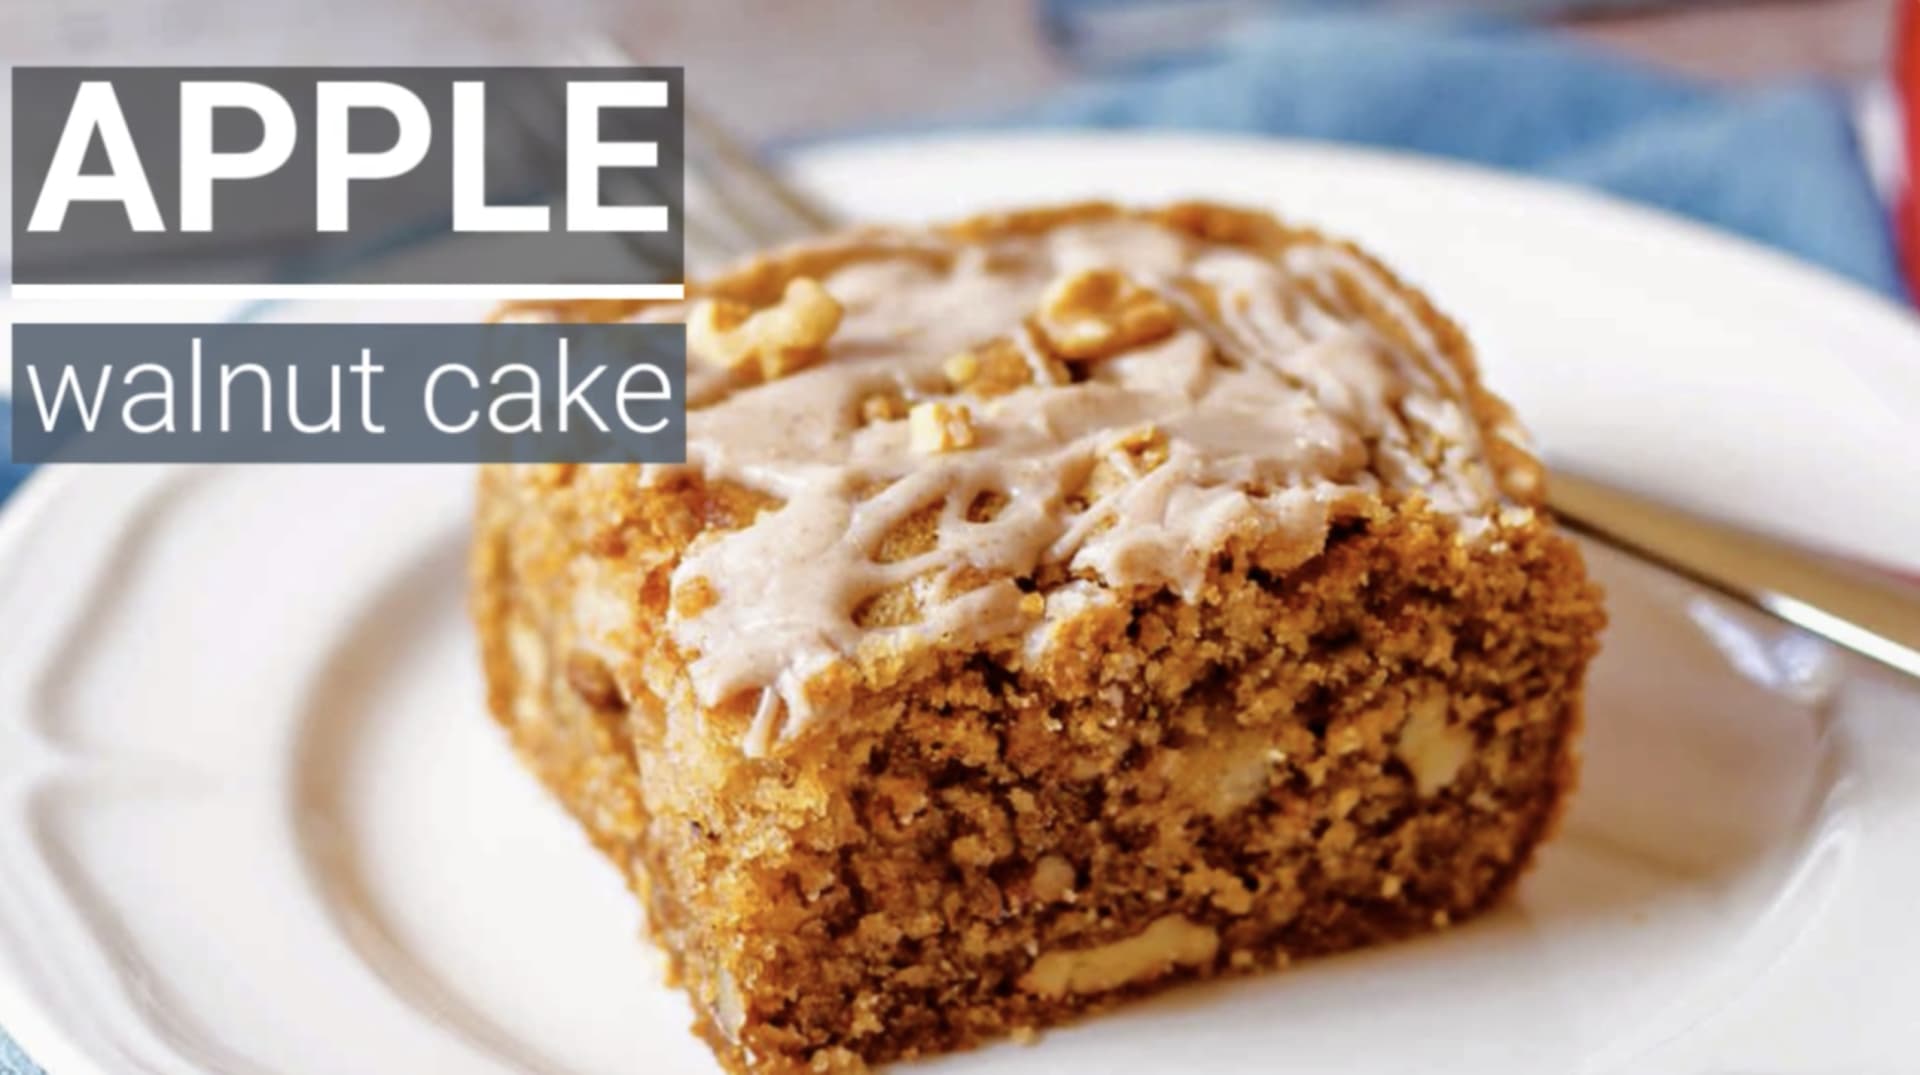 Apple walnut cake with honey - easy and super moist! (video)